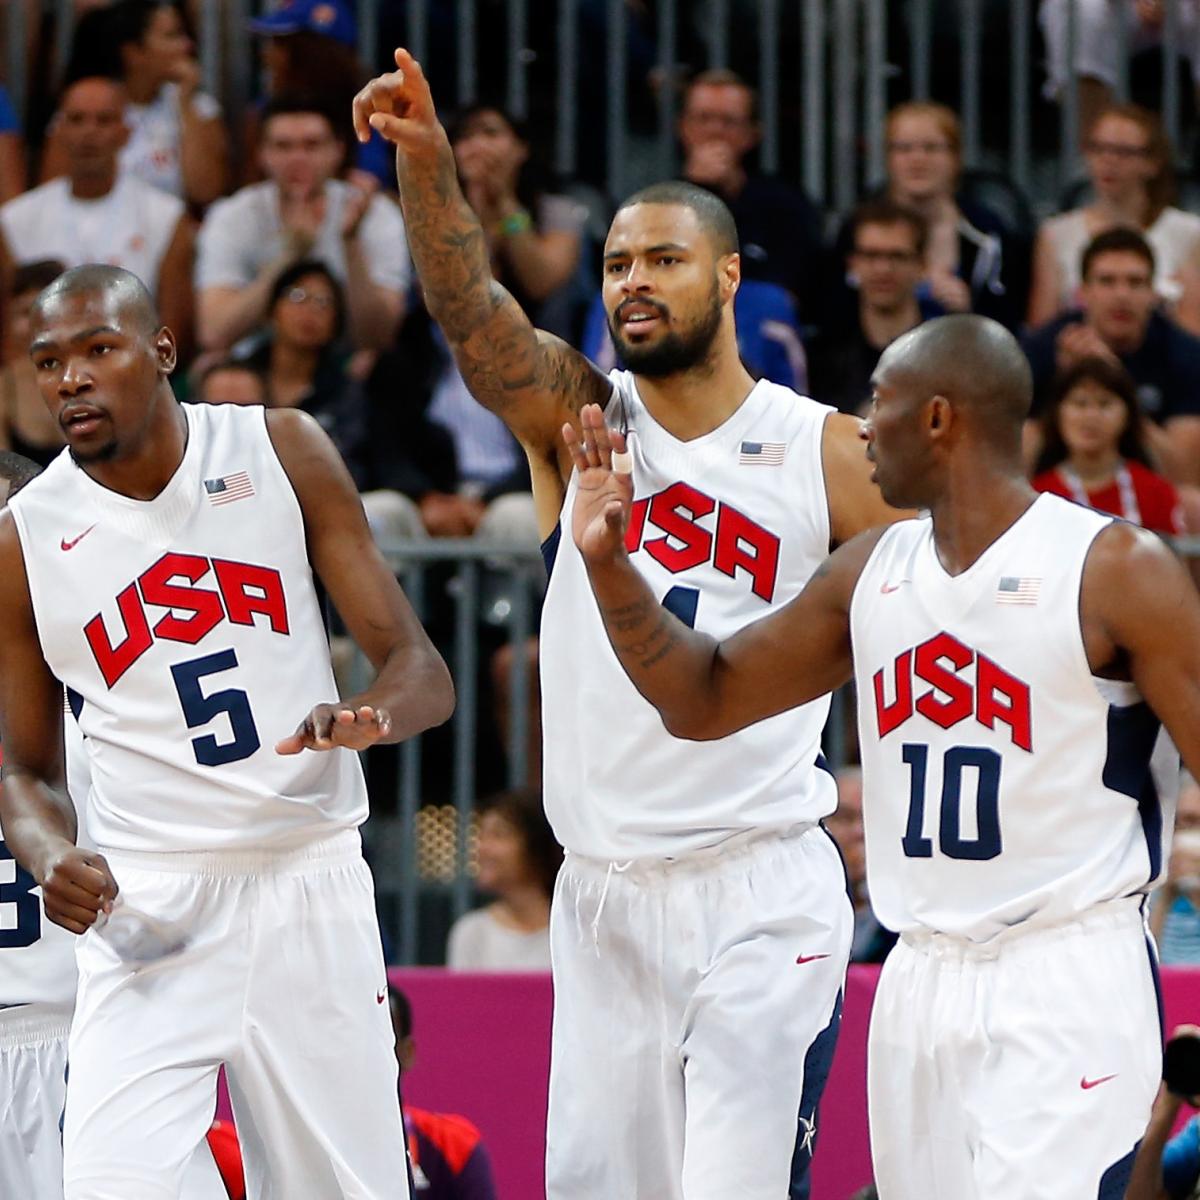 Olympic Basketball Schedule 2012 Previewing Day 4's Top Matchups